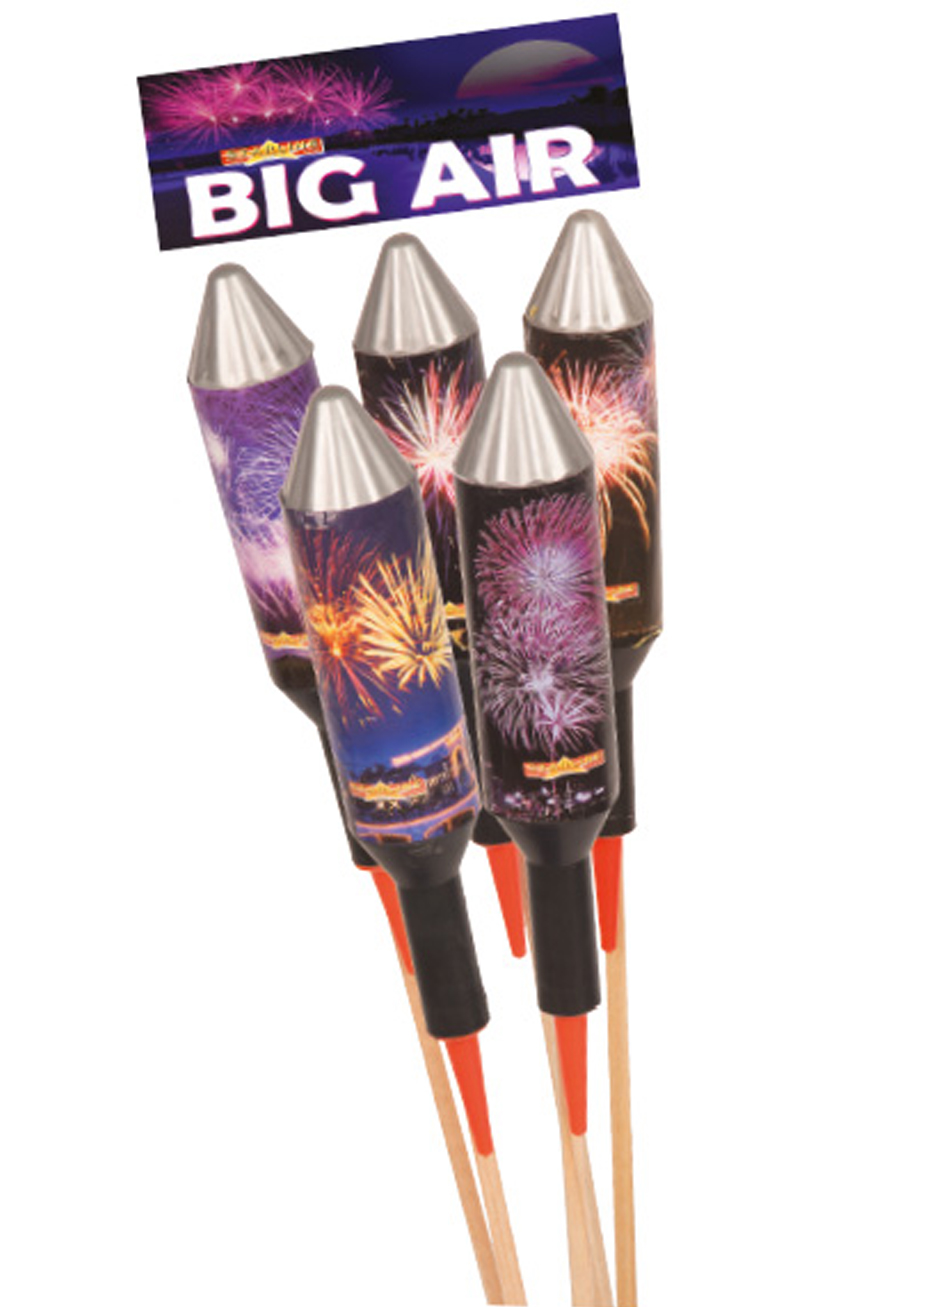 Mitraillette 500 cps - Magasin feux artifice